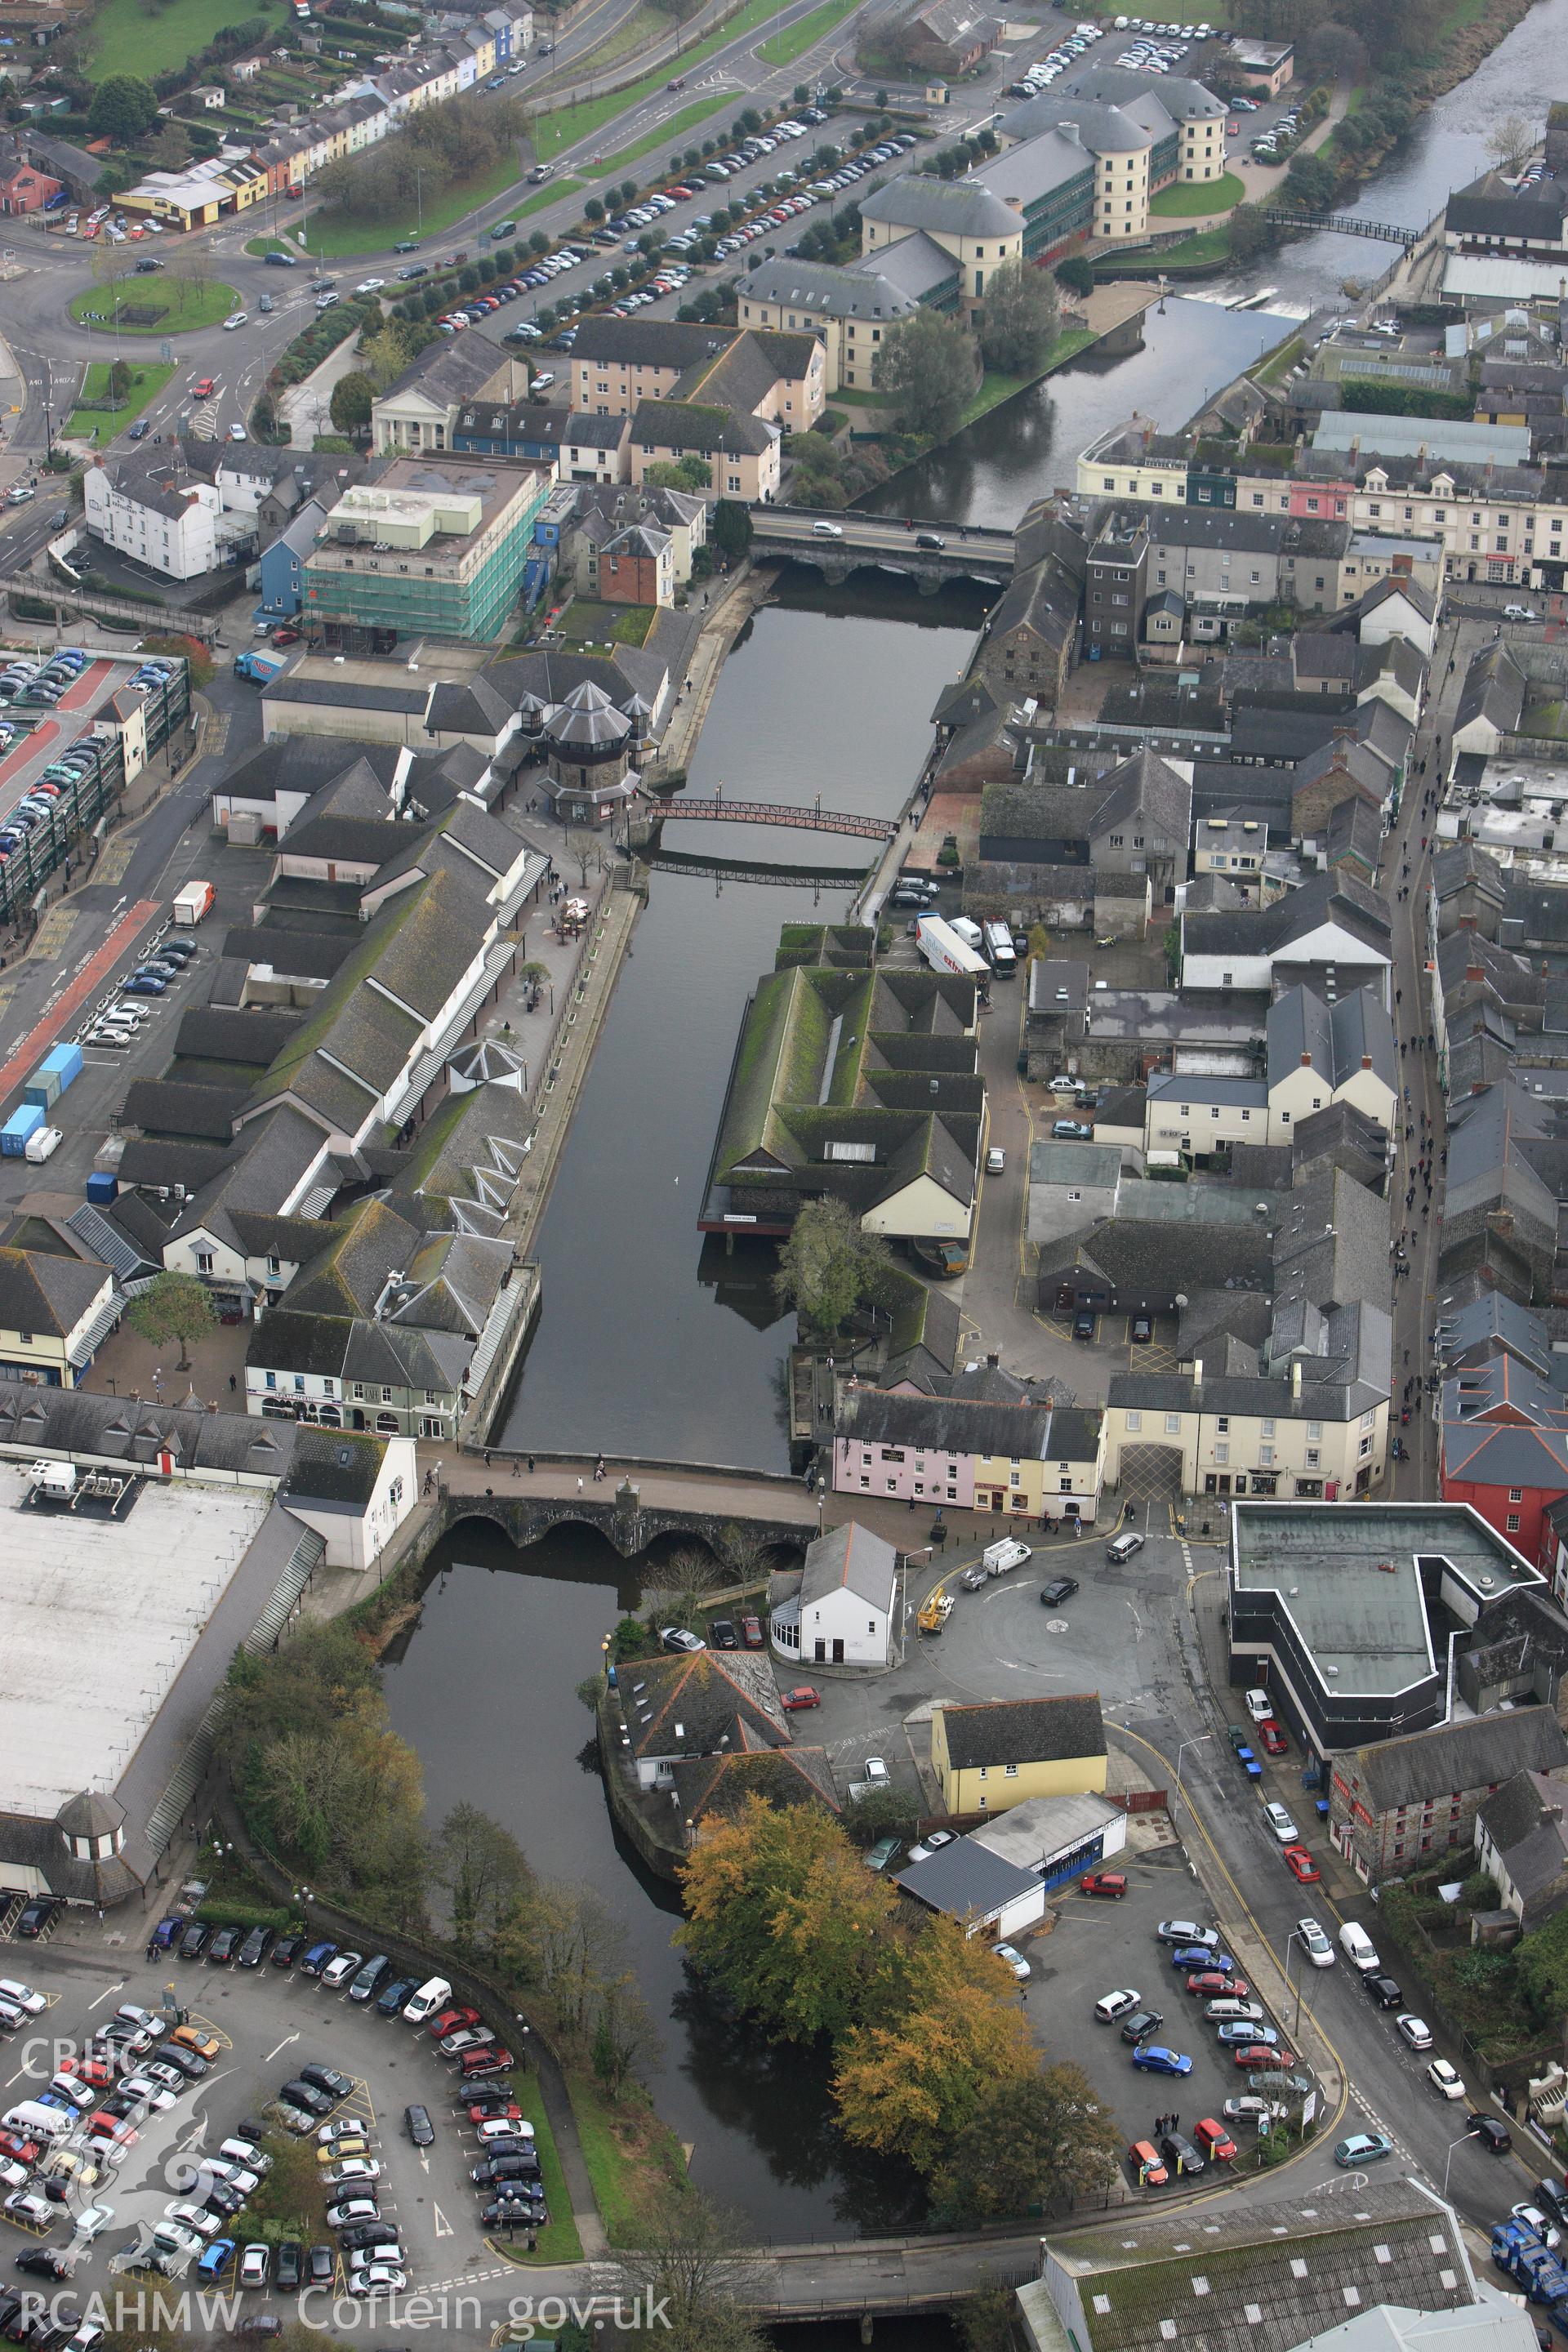 RCAHMW colour oblique aerial photograph of Haverfordwest. Taken on 09 November 2009 by Toby Driver